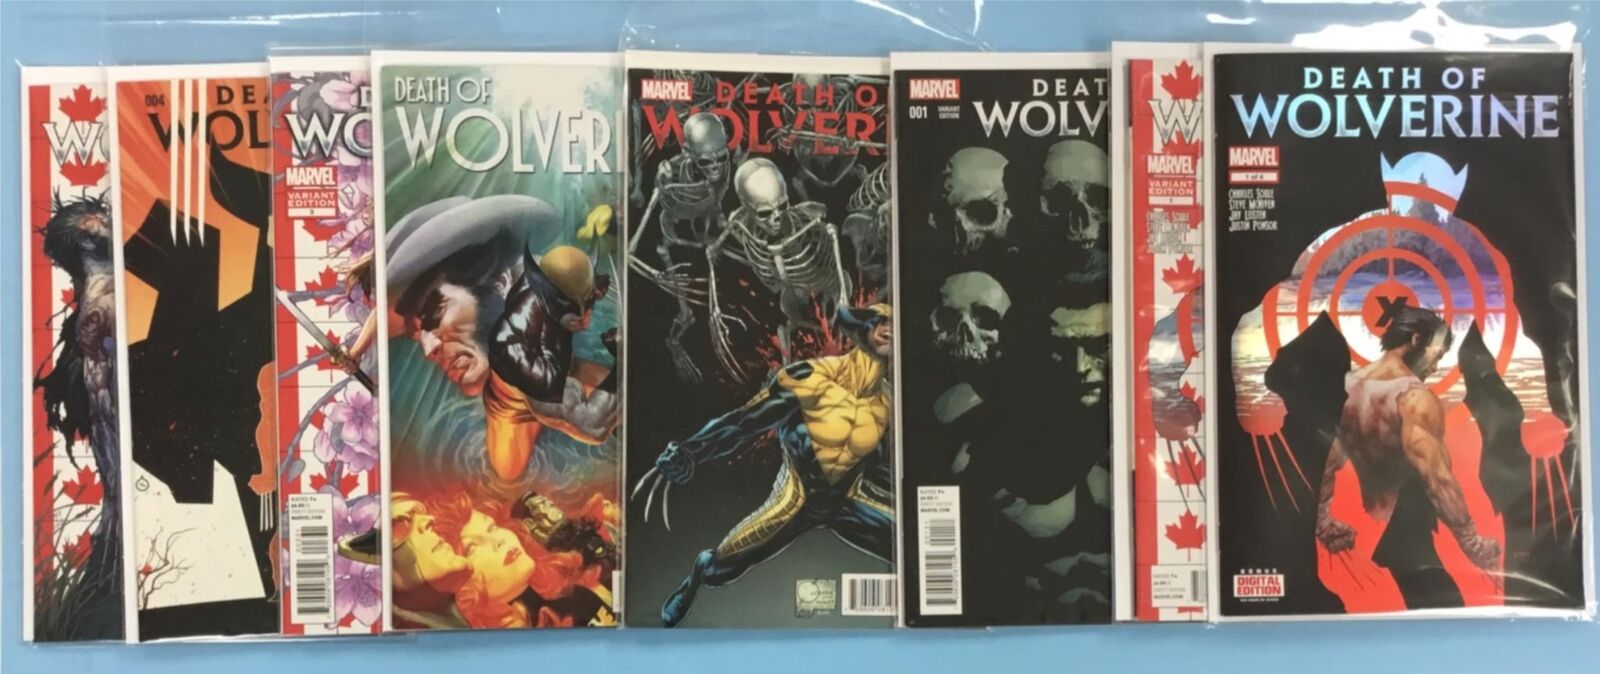 8x DEATH OF WOLVERINE # 1 3 4 Comic ~ VARIANT A B/1:100 D/1:75 G/1:50 J 2ND 1:50